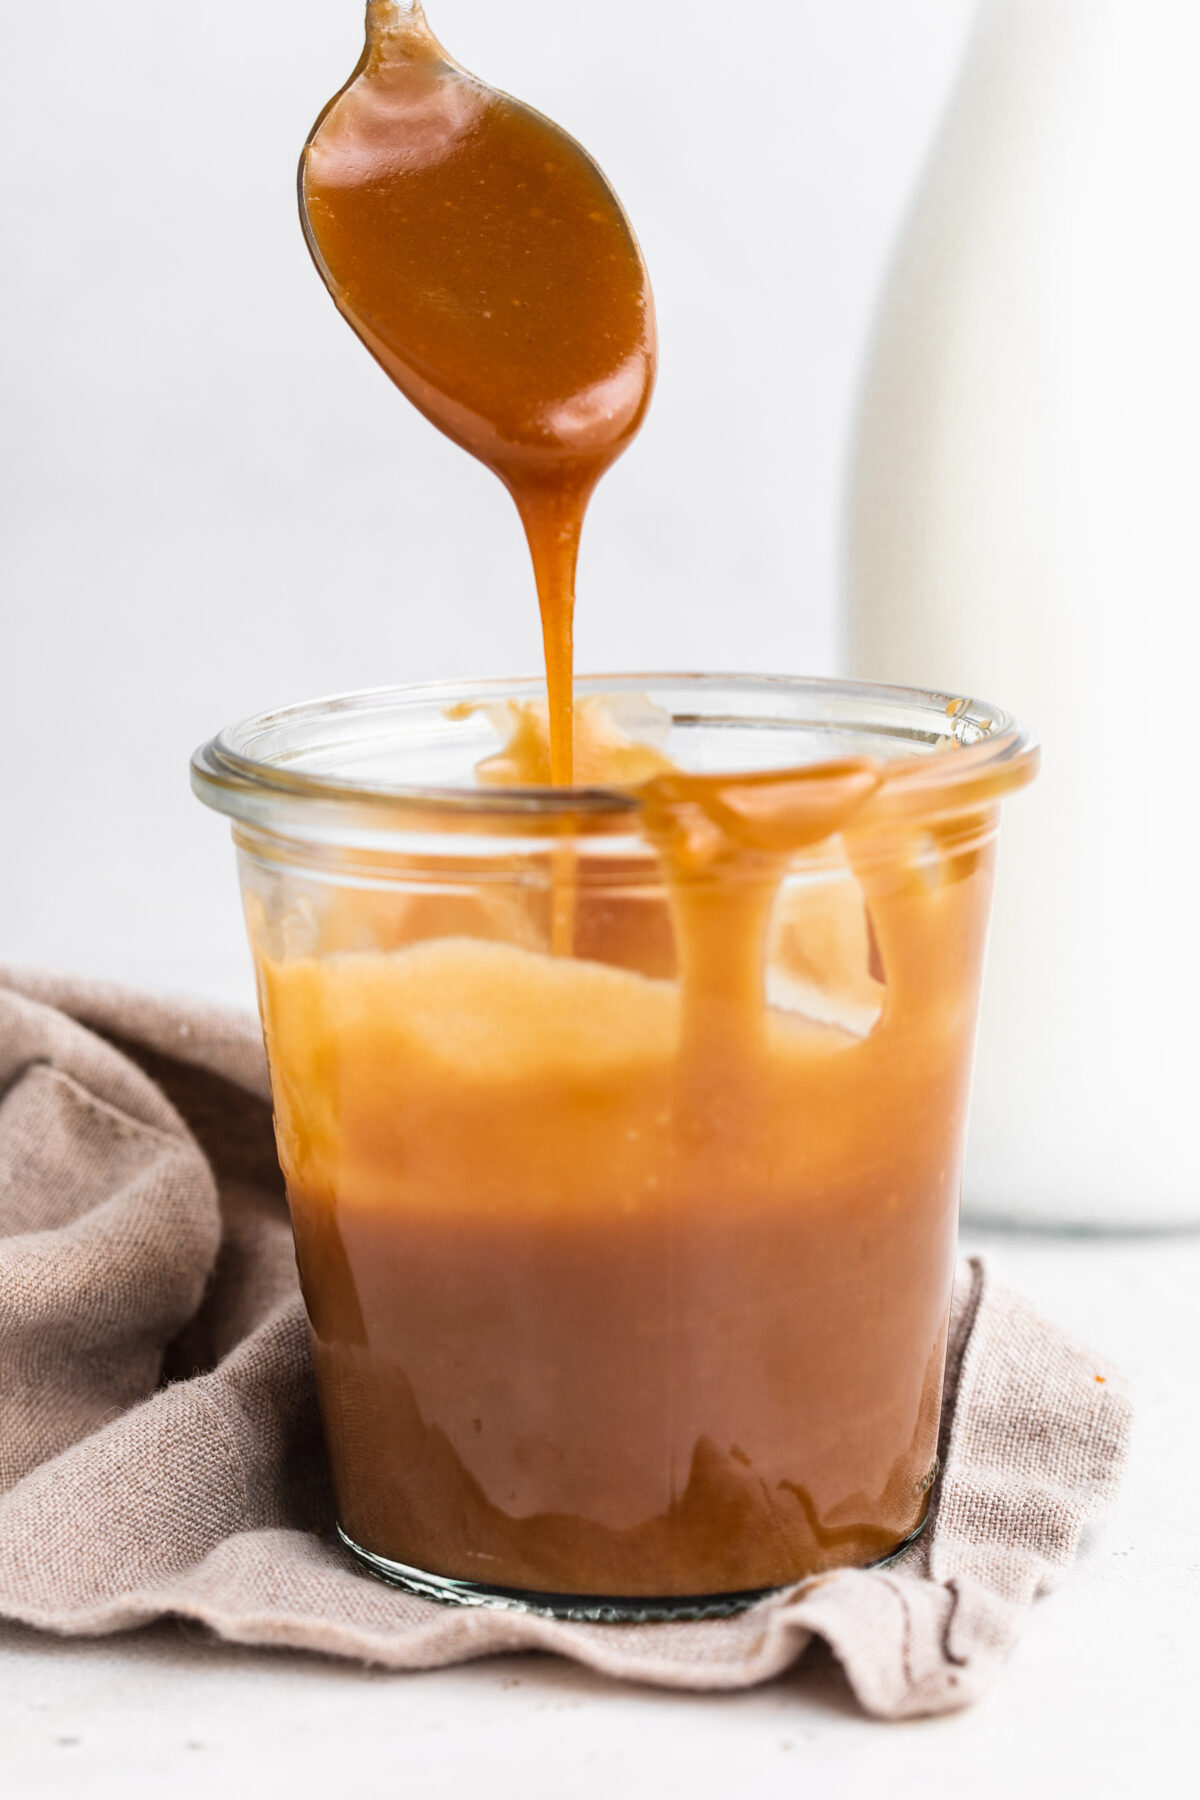 Side view of a jar of keto caramel sauce. A silver spoon hovers above the glass jar, drizzling caramel back in to the jar.